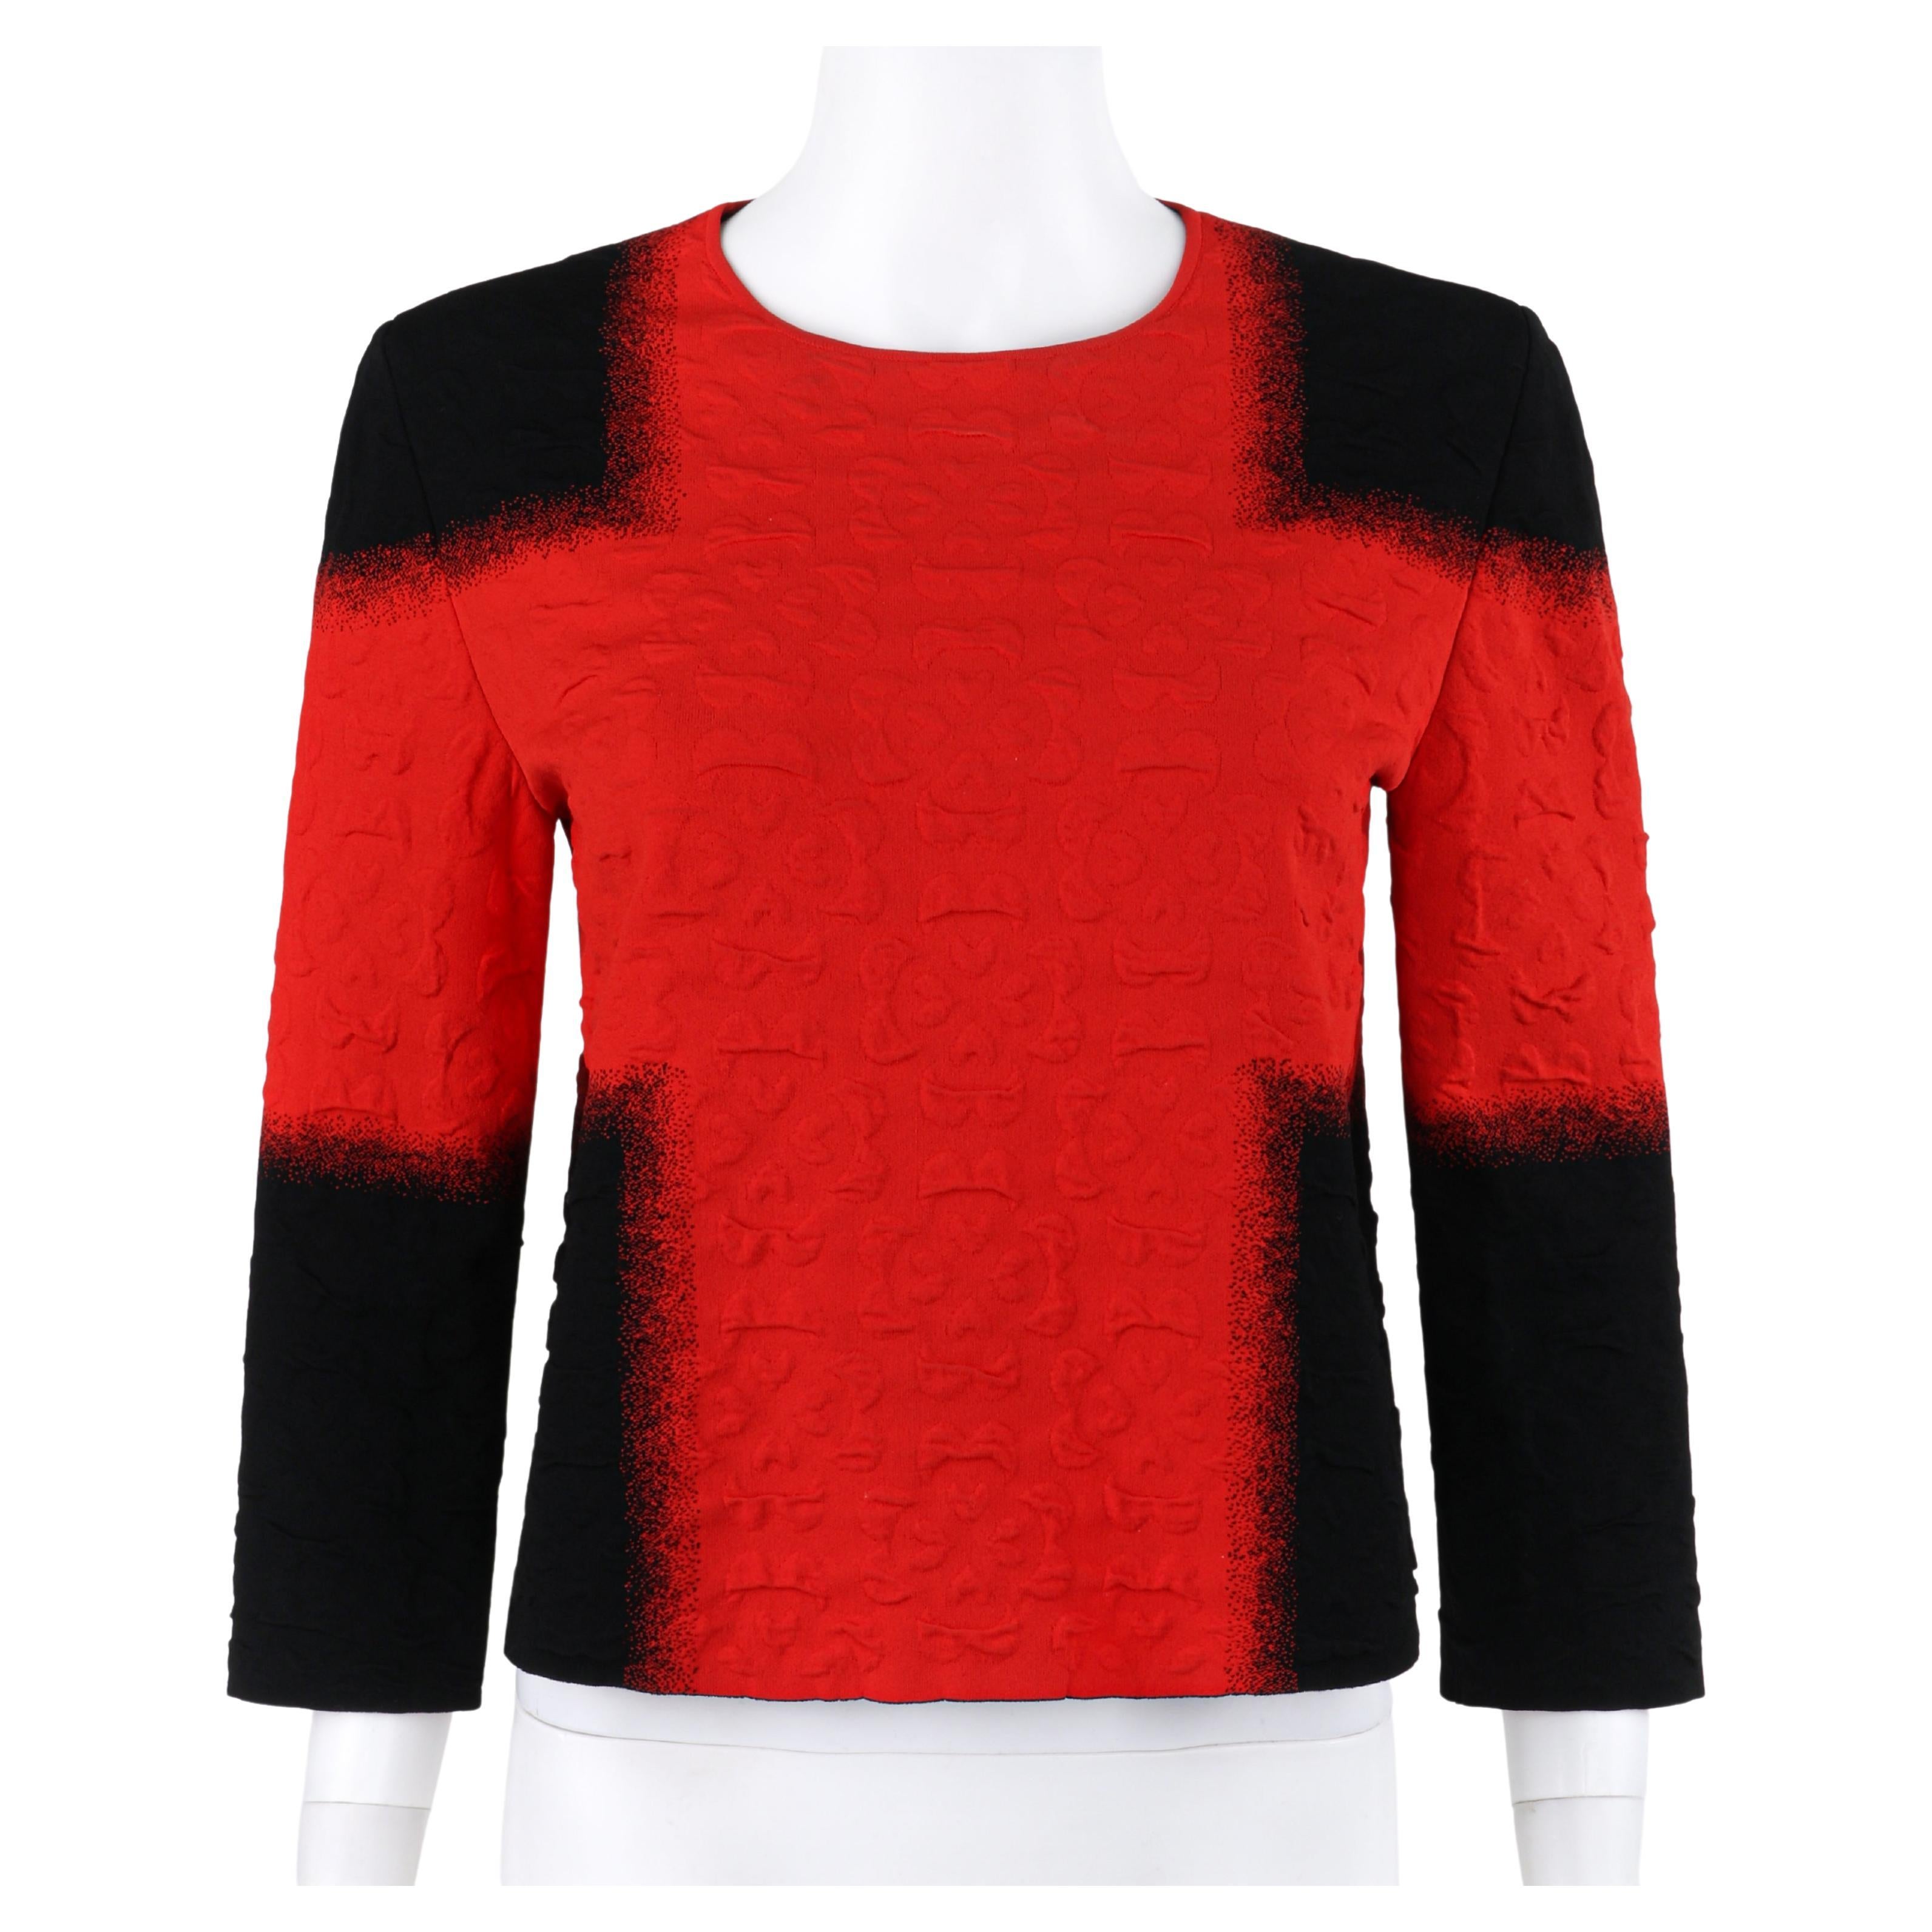 ALEXANDER McQUEEN Resort 2015 Black Red Embossed Stretch Knit Colorblock Top 

Brand / Manufacturer: Alexander McQueen
Collection: Resort 2015
Designer: Sarah Burton
Style: Long sleeve top
Color(s): Shades of Black, red
Lined: No
Marked Fabric